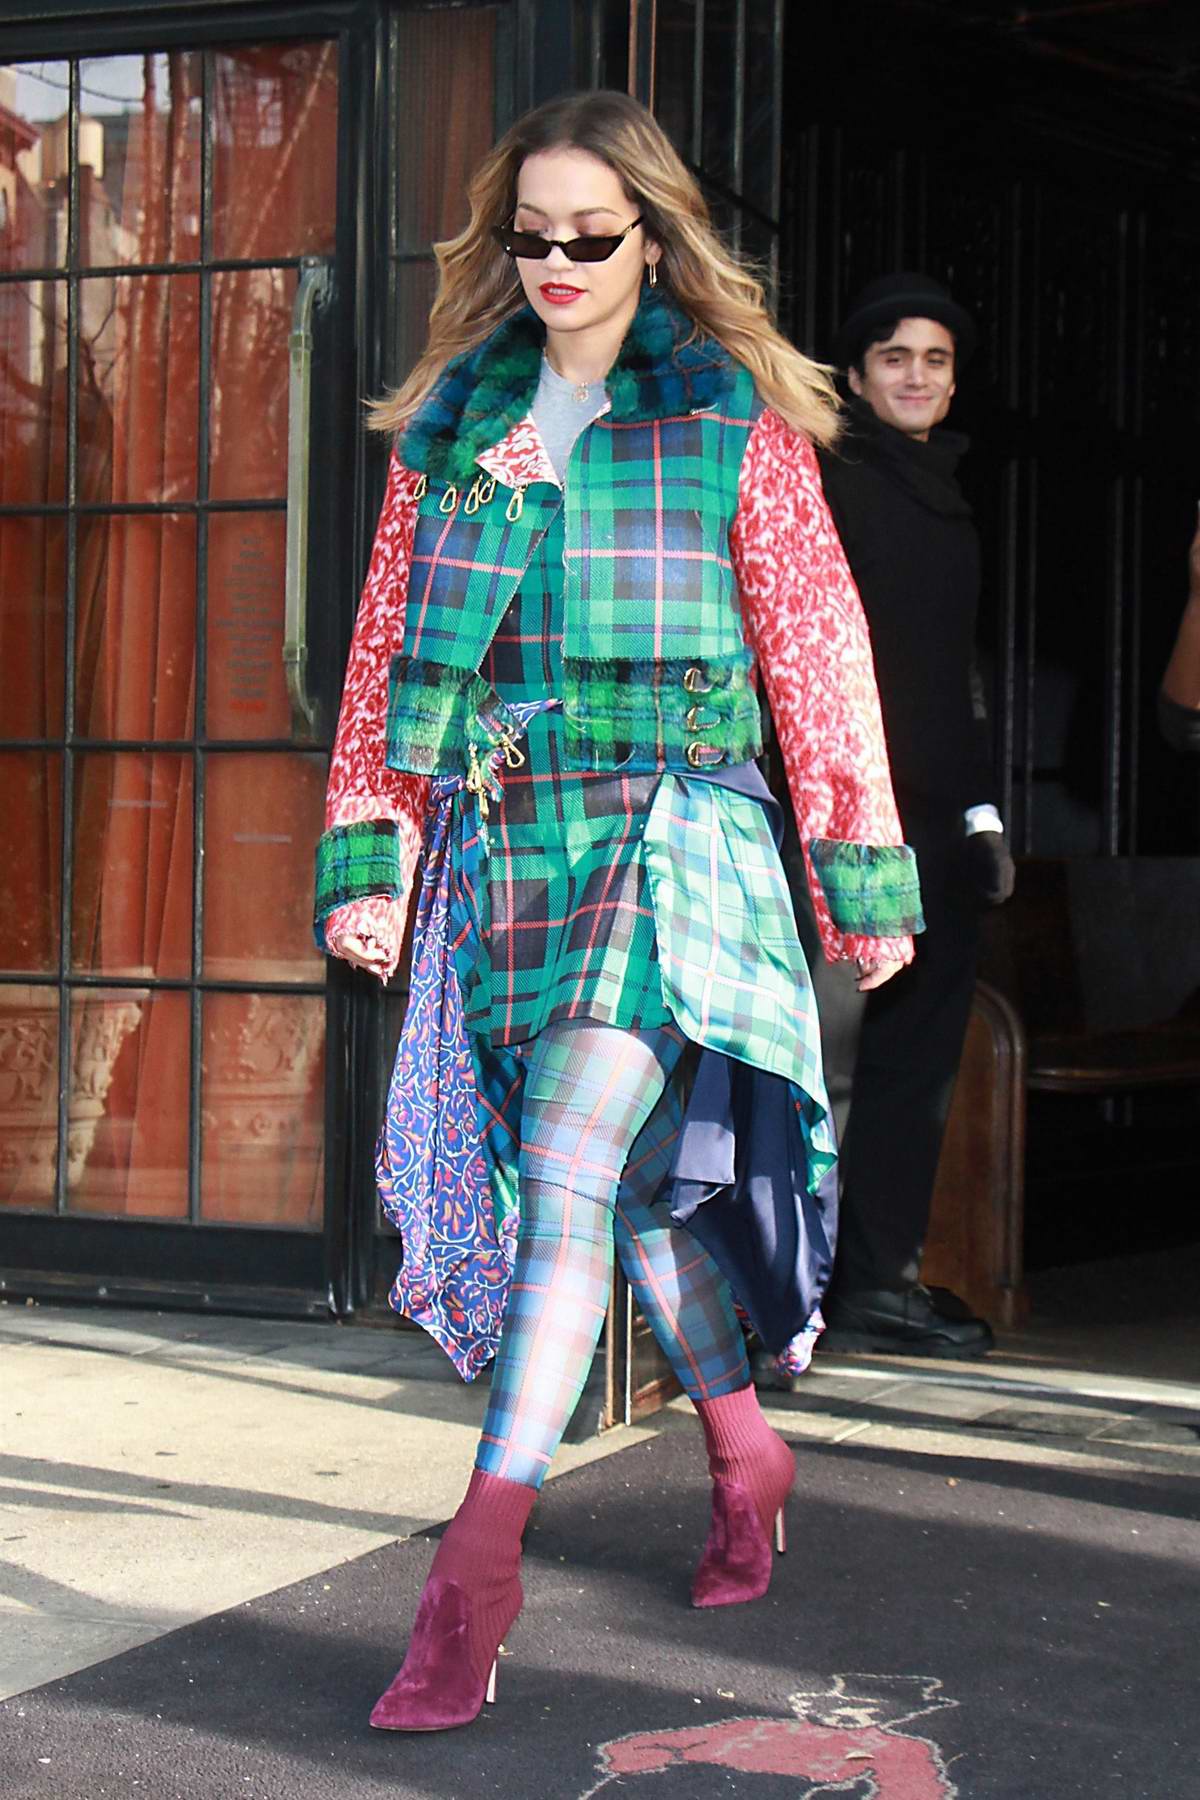 rita ora dressed in a colorful plaid outfit as she heads to the